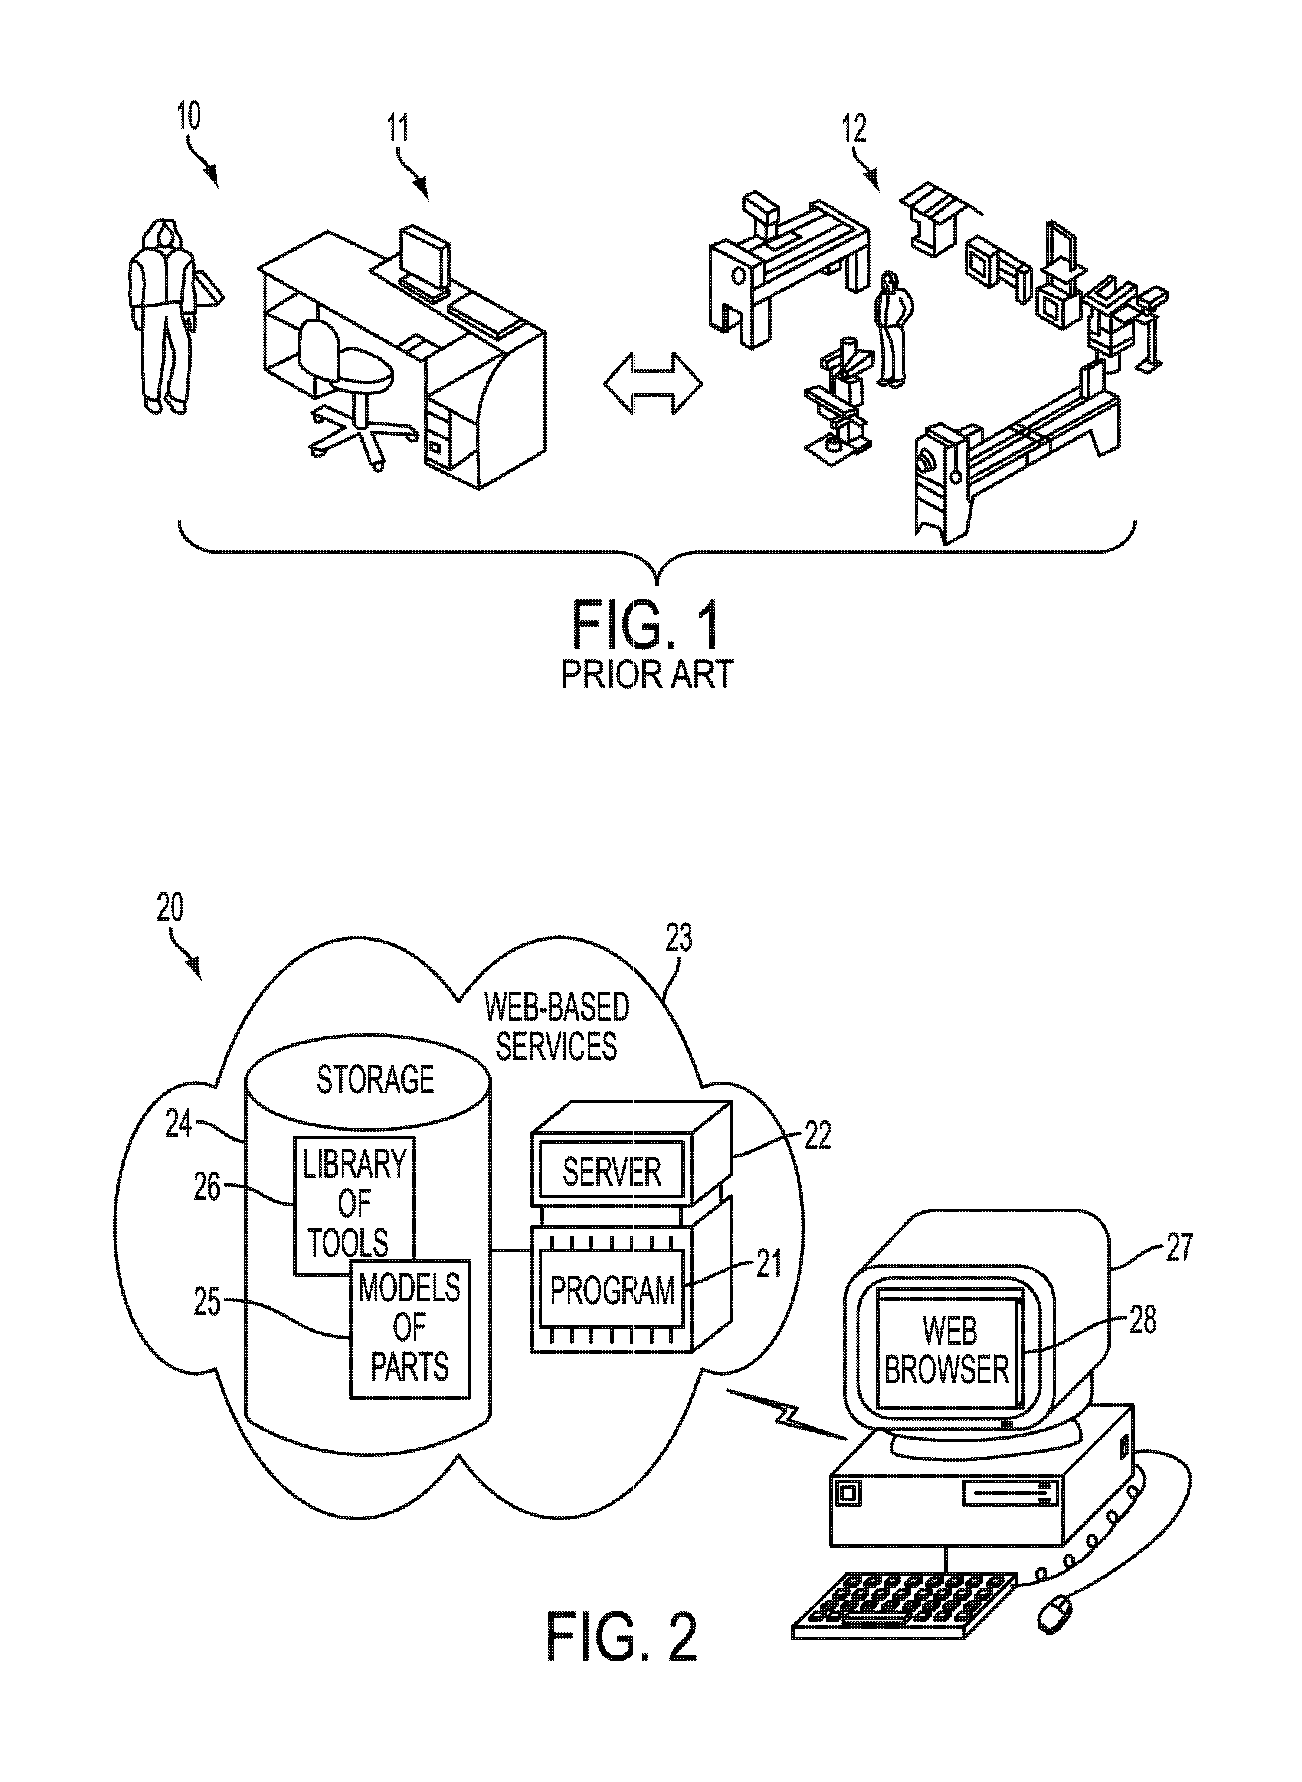 Computer-Implemented System And Method For Analyzing Machined Part Manufacturability And Performing Process Planning